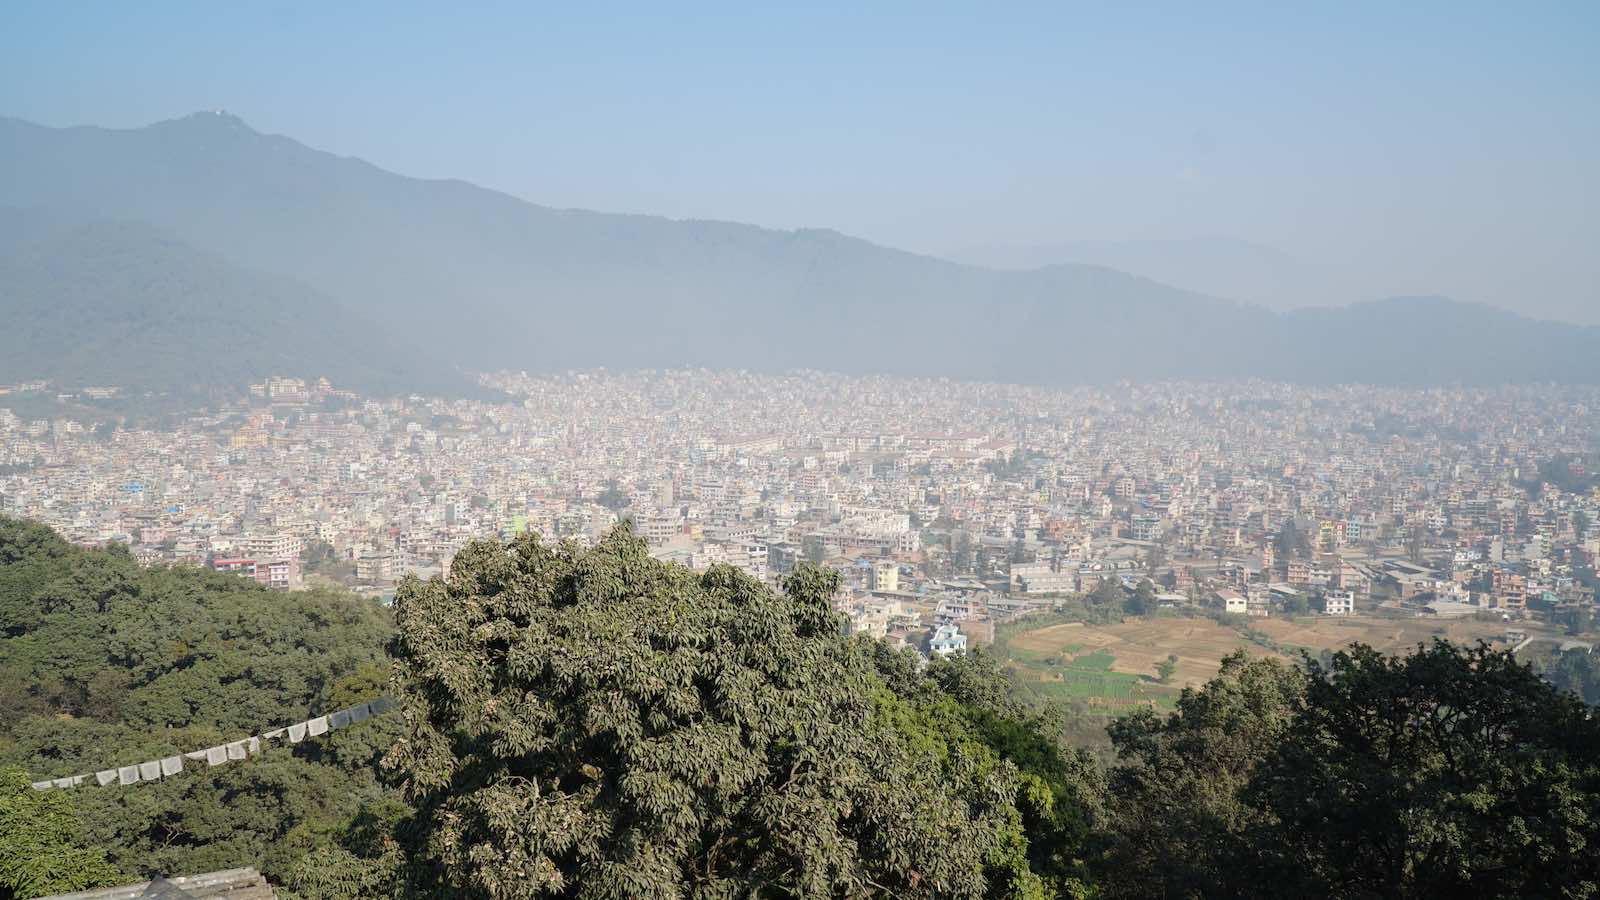 View of just a small slice of Kathmandu. It was like this all around.